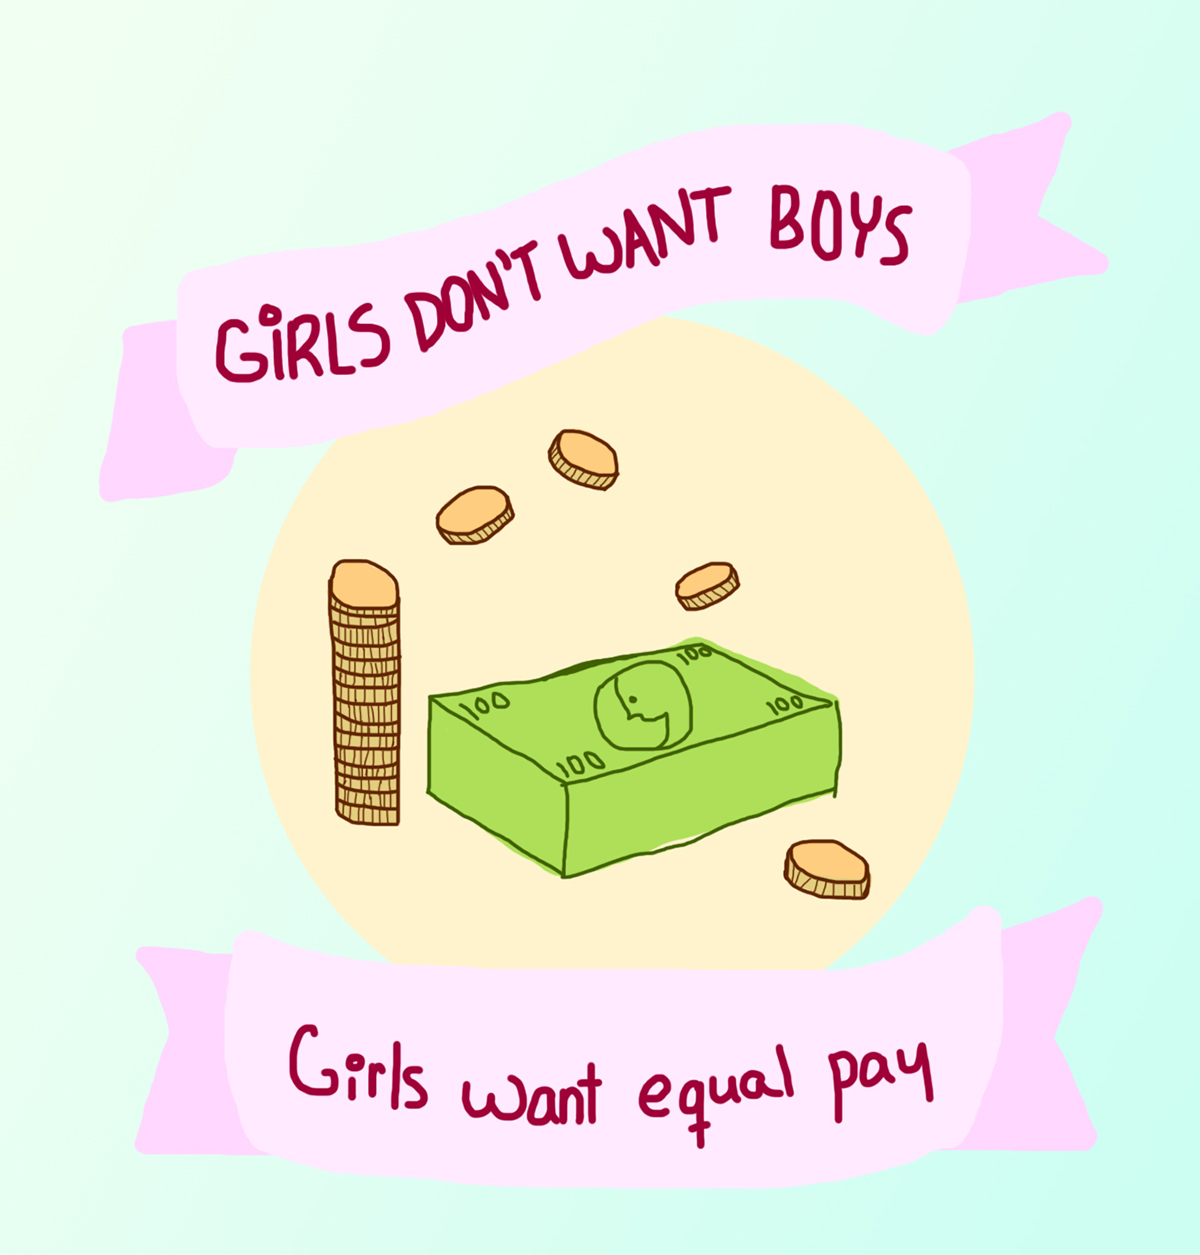 feminism equal pay books plot lines 'illustration' print simple pastel colors banners